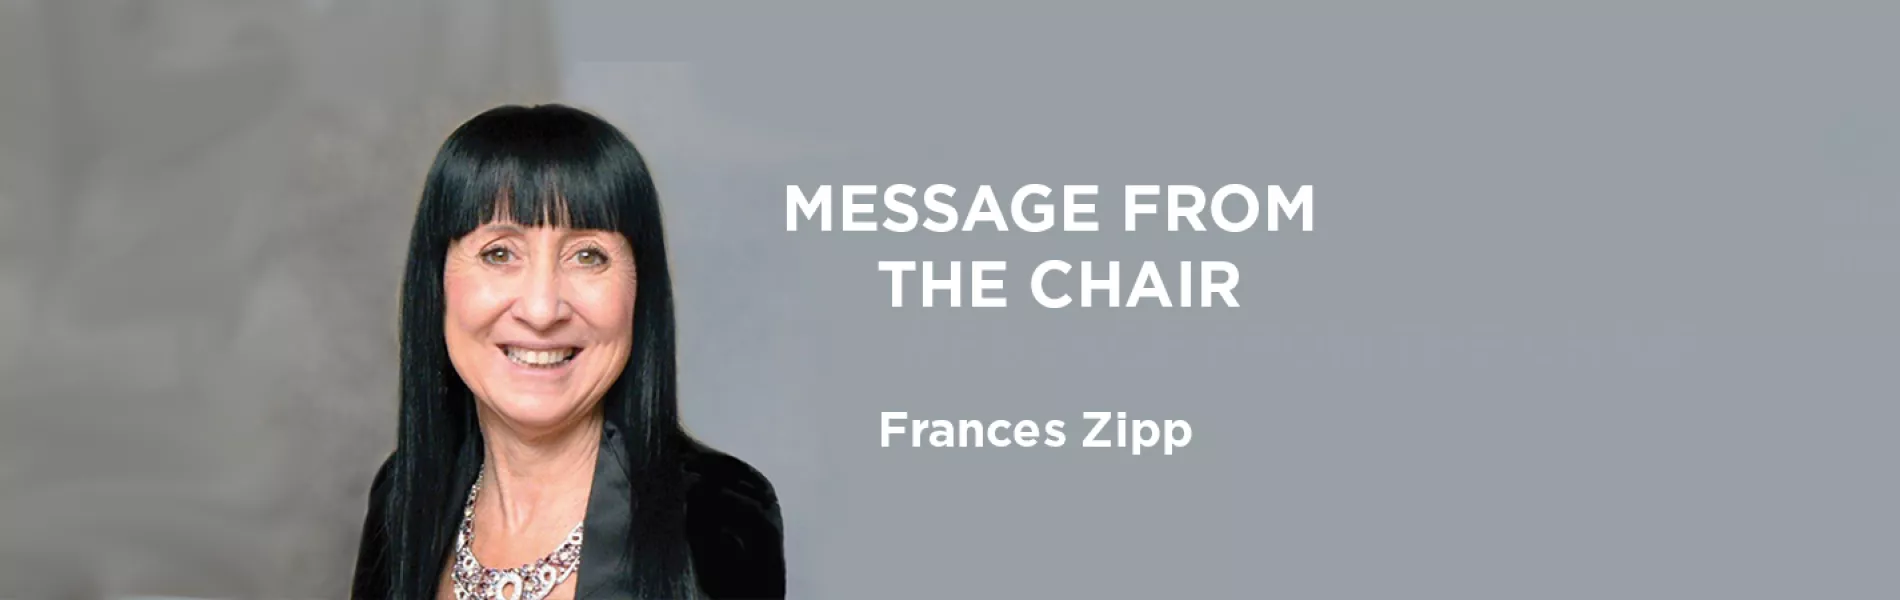 Frances M. Zipp is the 2020 ISPE International Board of Directors Chair and President and CEO of Lachman Consultant Services, Inc.